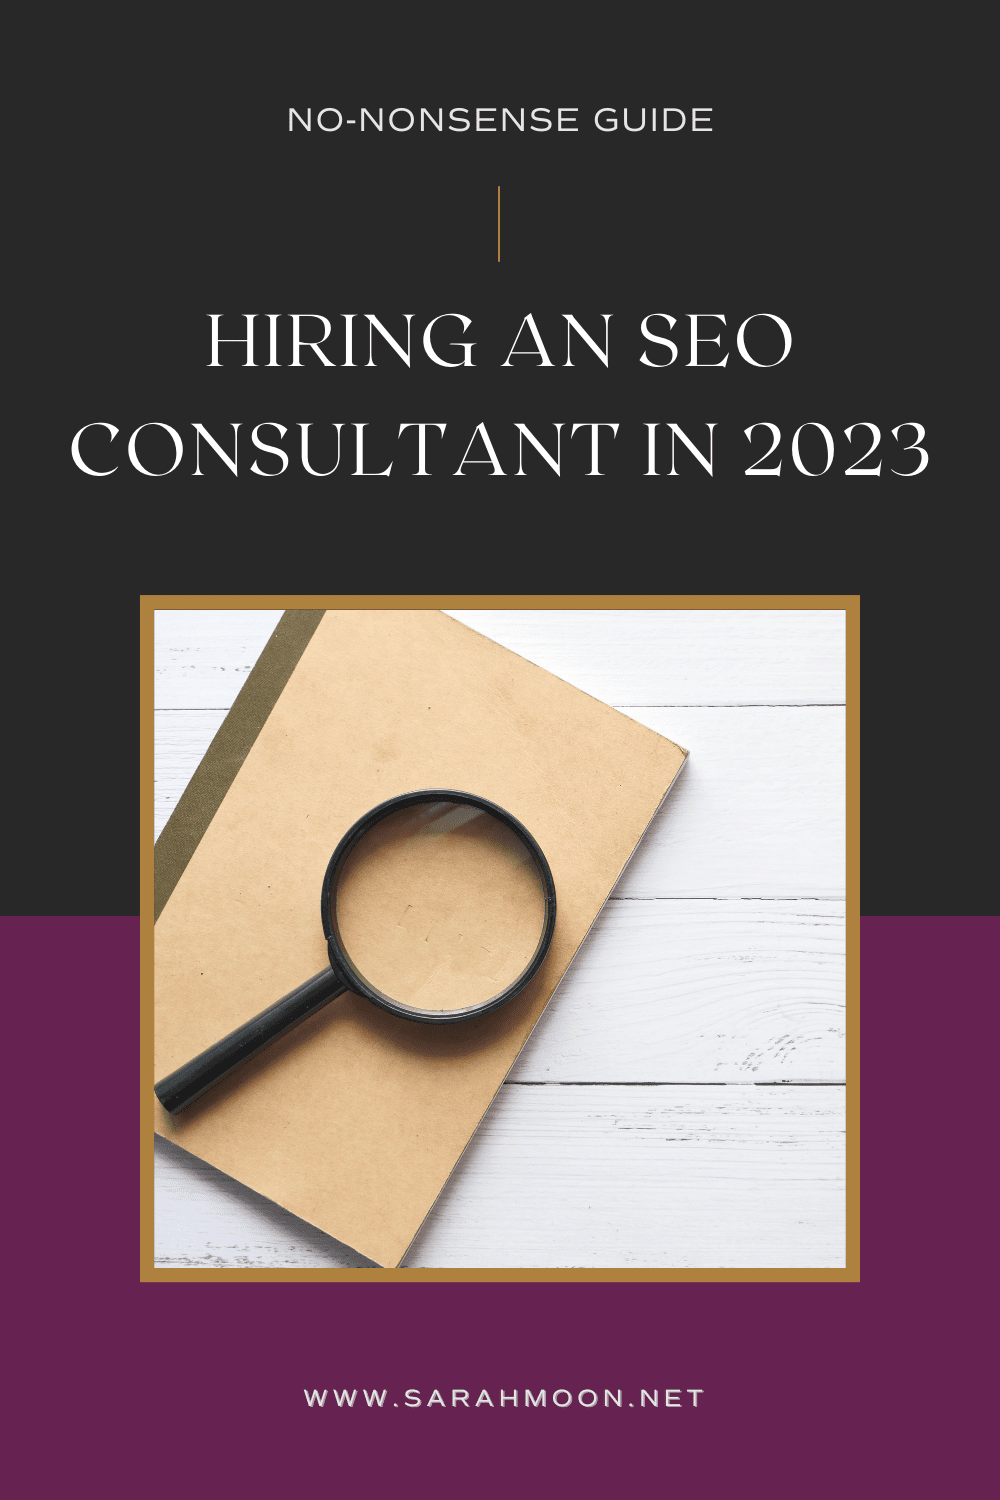 How to Hire an SEO Consultant in 2023